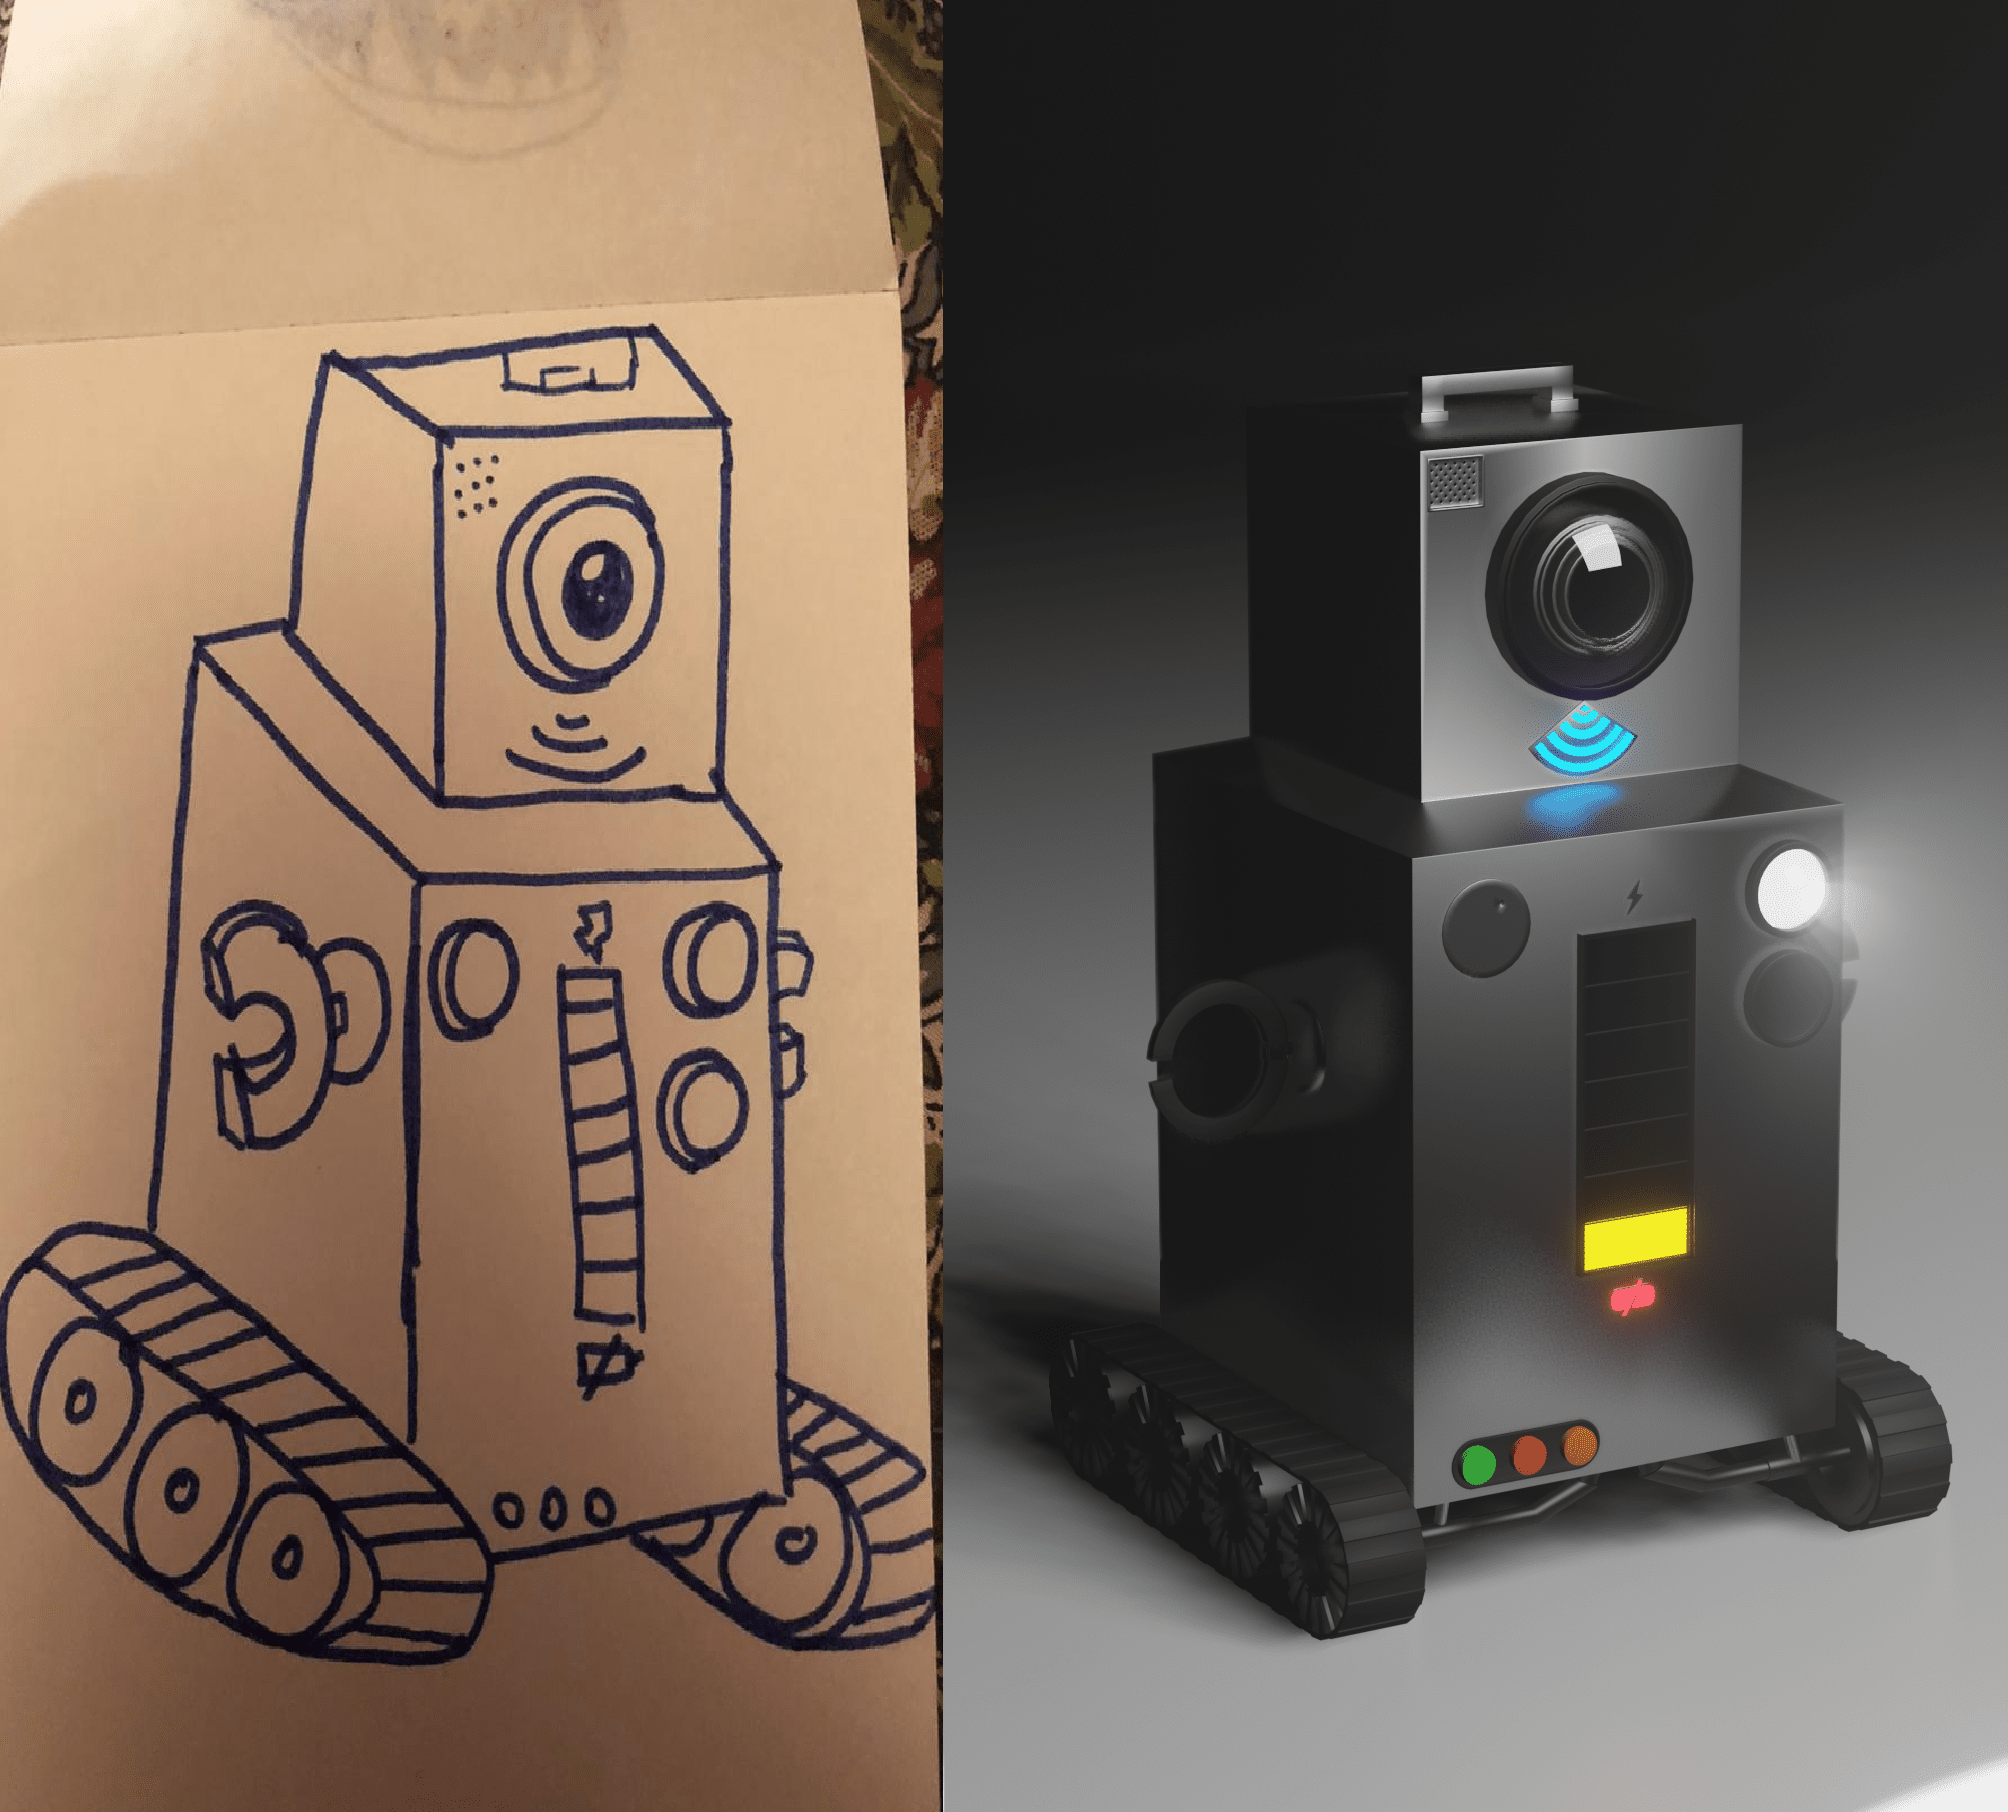 on the left, a cute drawing of a rectangular cycloptic robot, on the right, a 3D render version of the same drawing